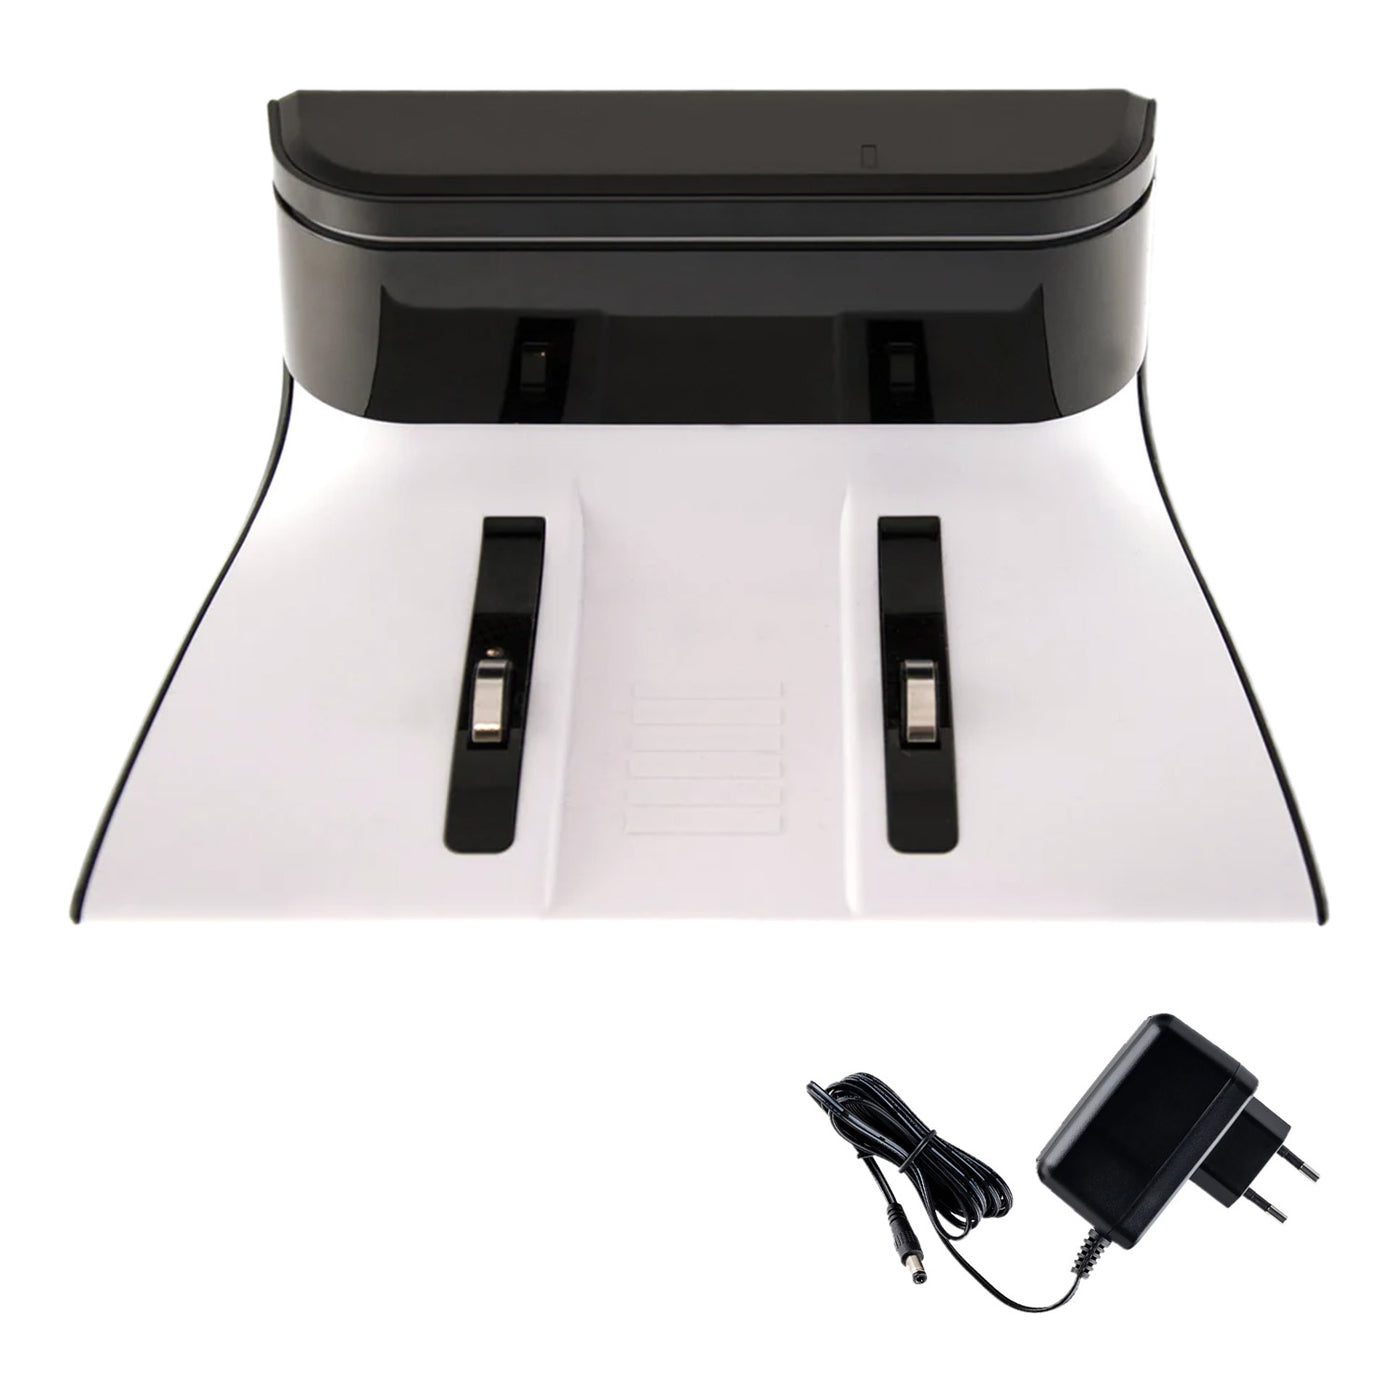 Replacement ZACO charging station incl. power cord for A10, A9sPro, A9s, A8s, V80, V85, A6